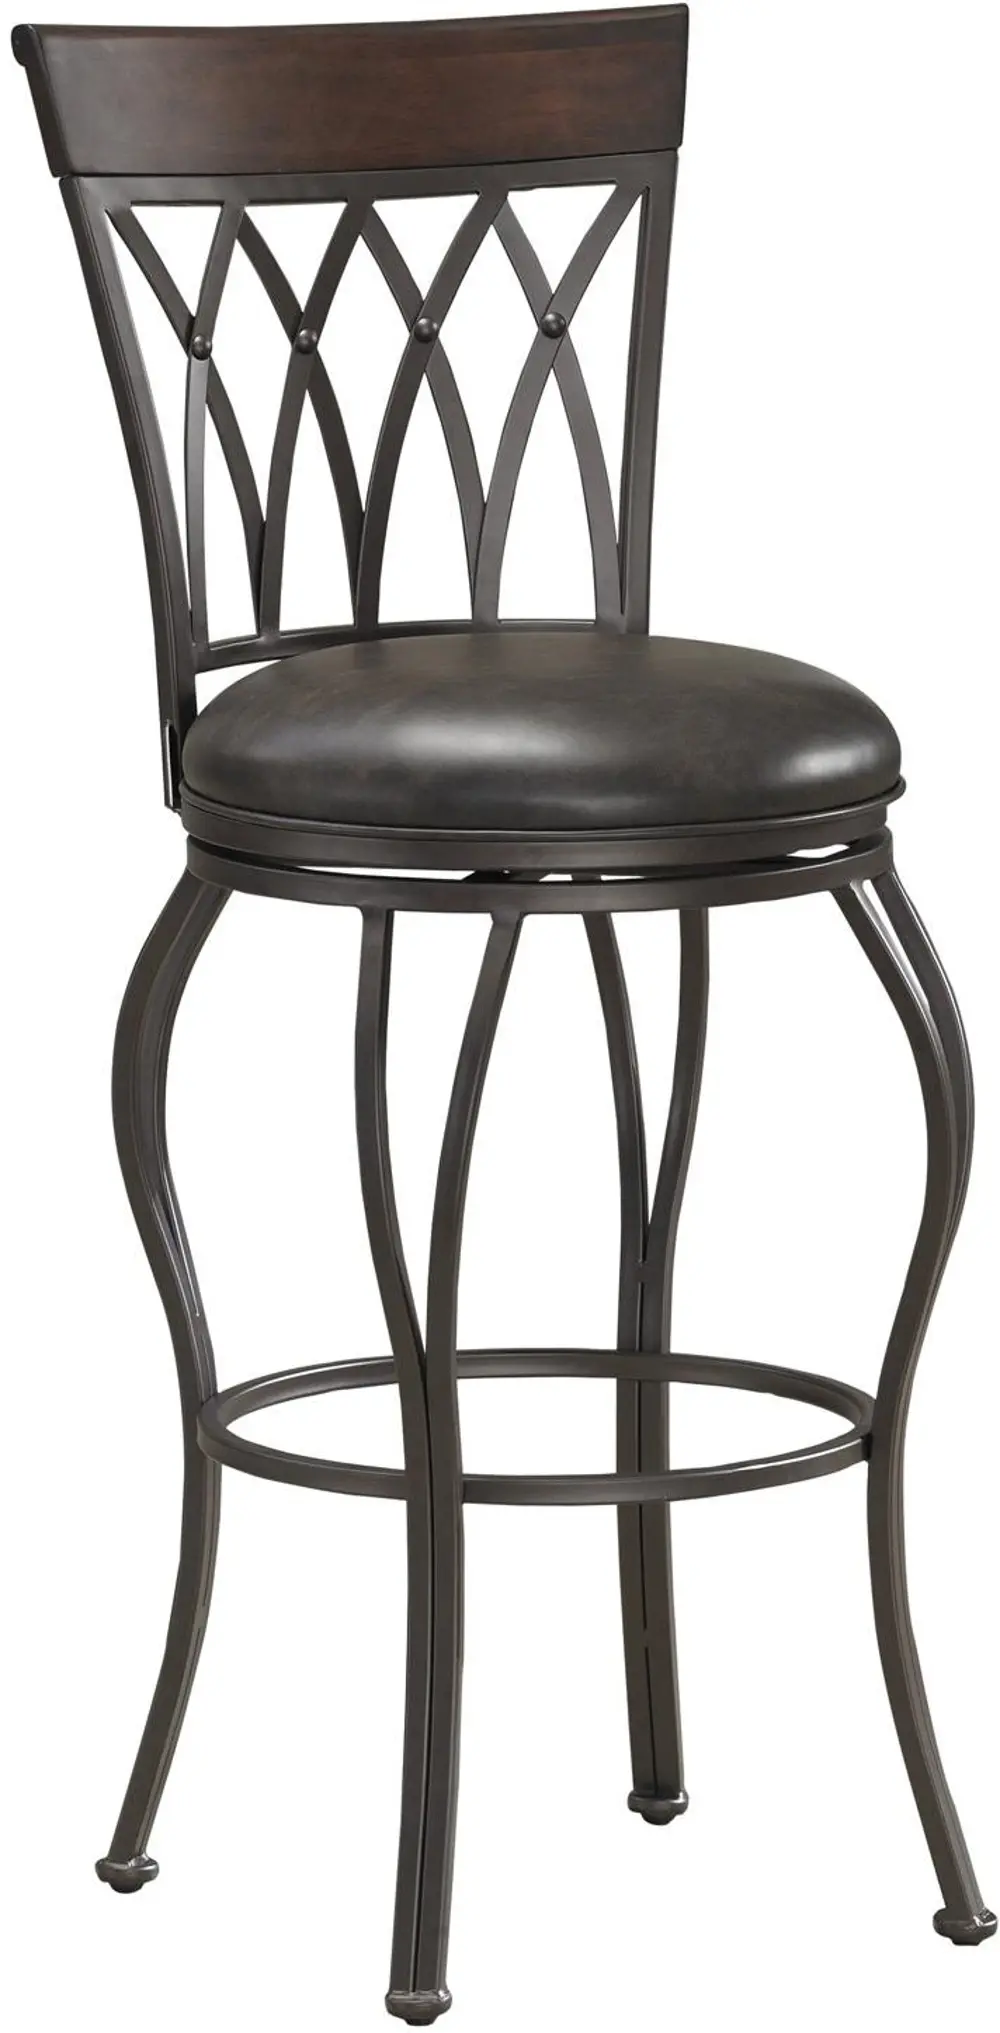 Pepper/Tabacco Counter Height Stool - Palermo-1